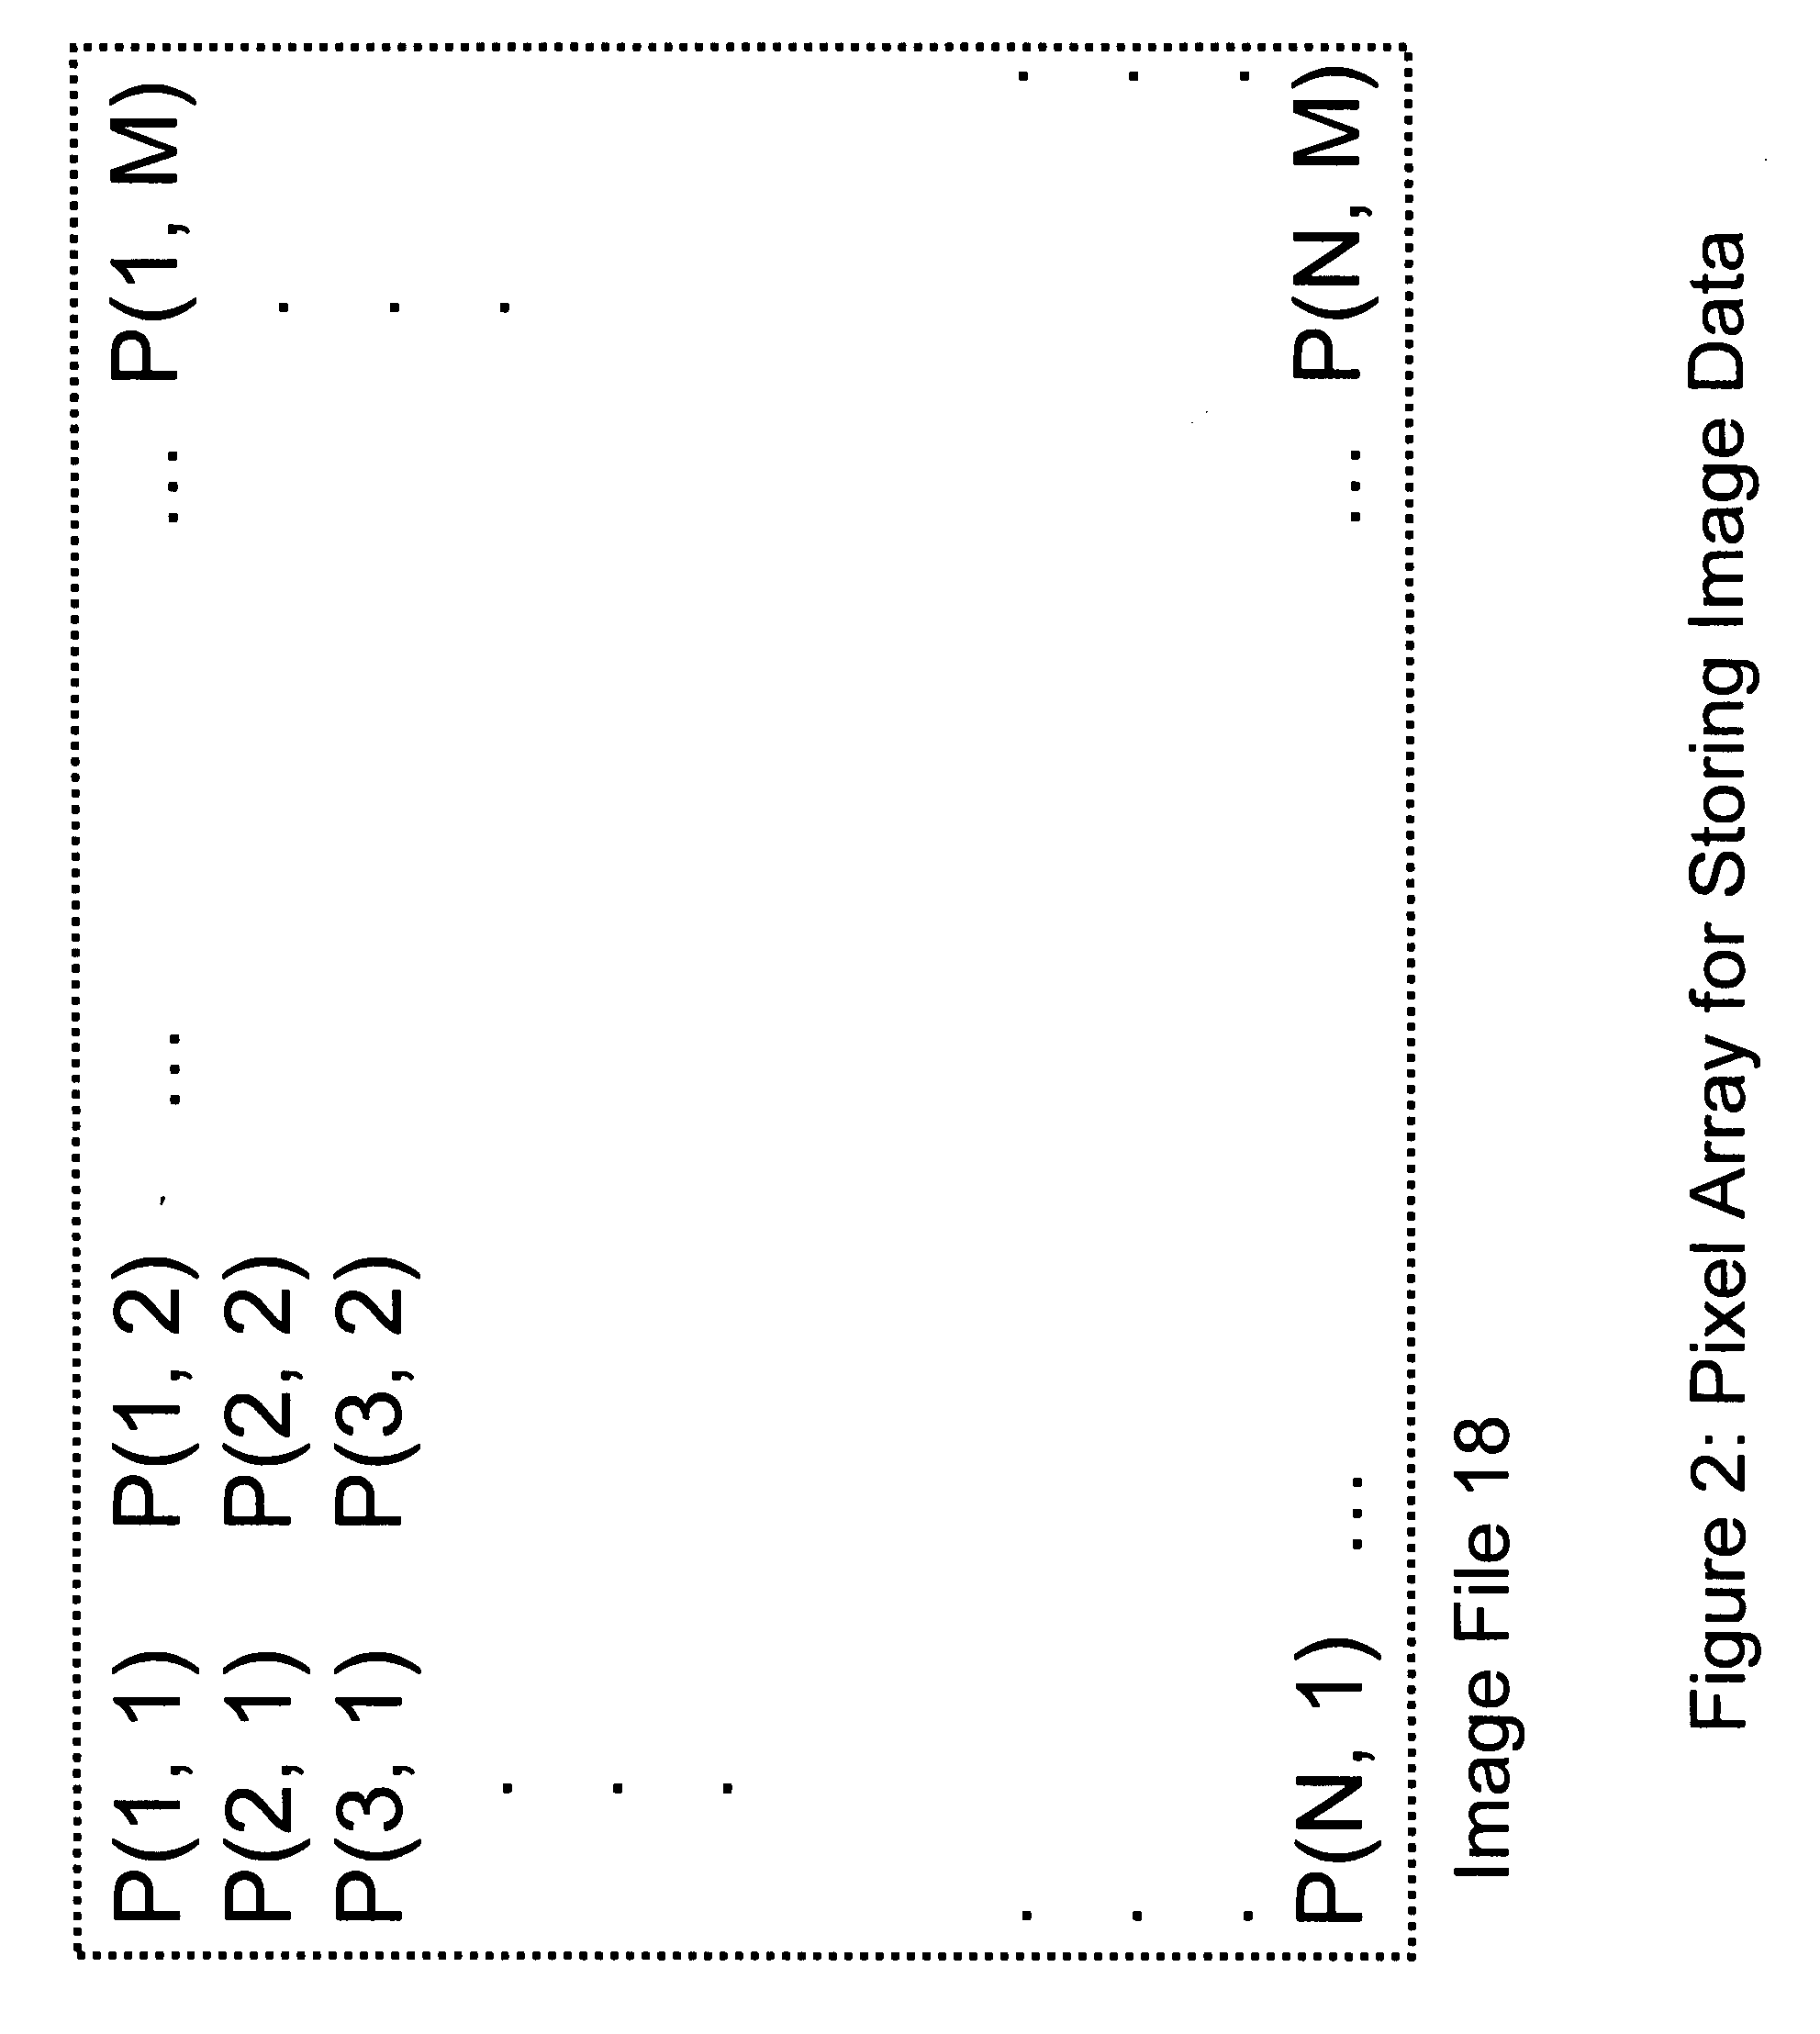 Method and system for improved detection of material reflectances in an image